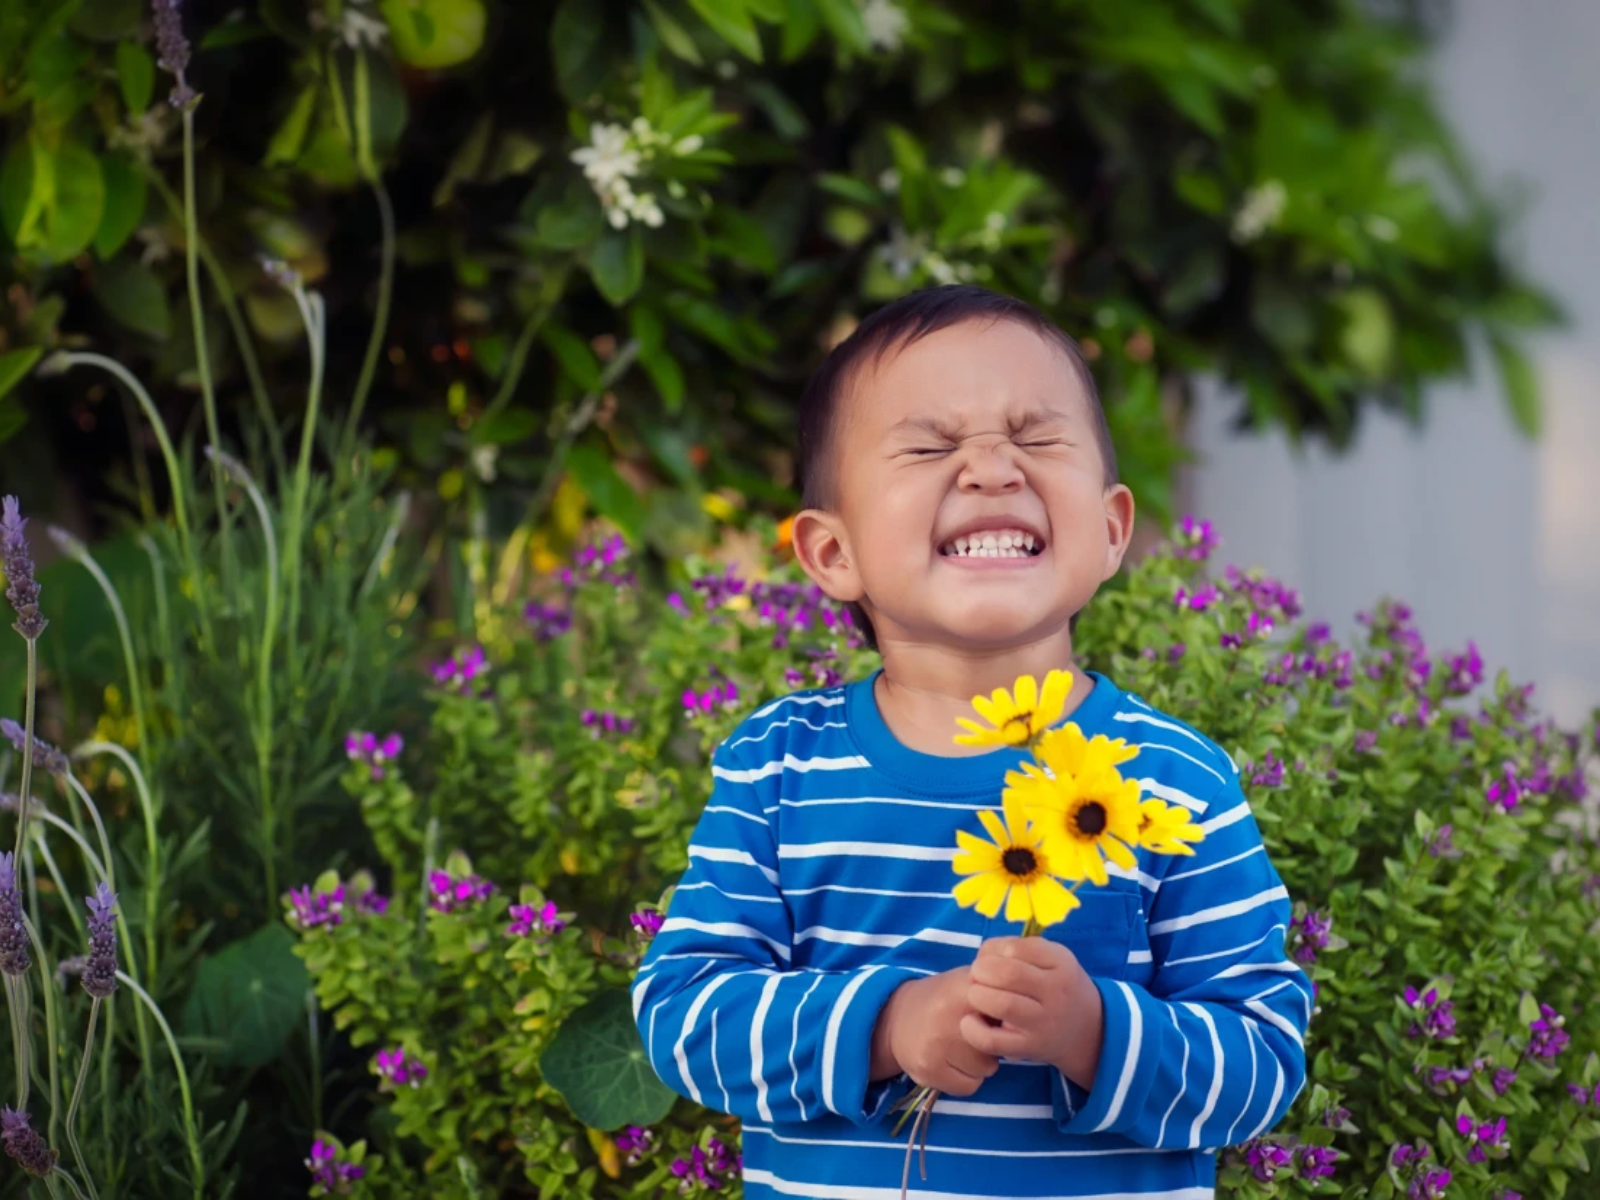 small child with a super big grin holding sunflowers in front of a purply-flowered bush.